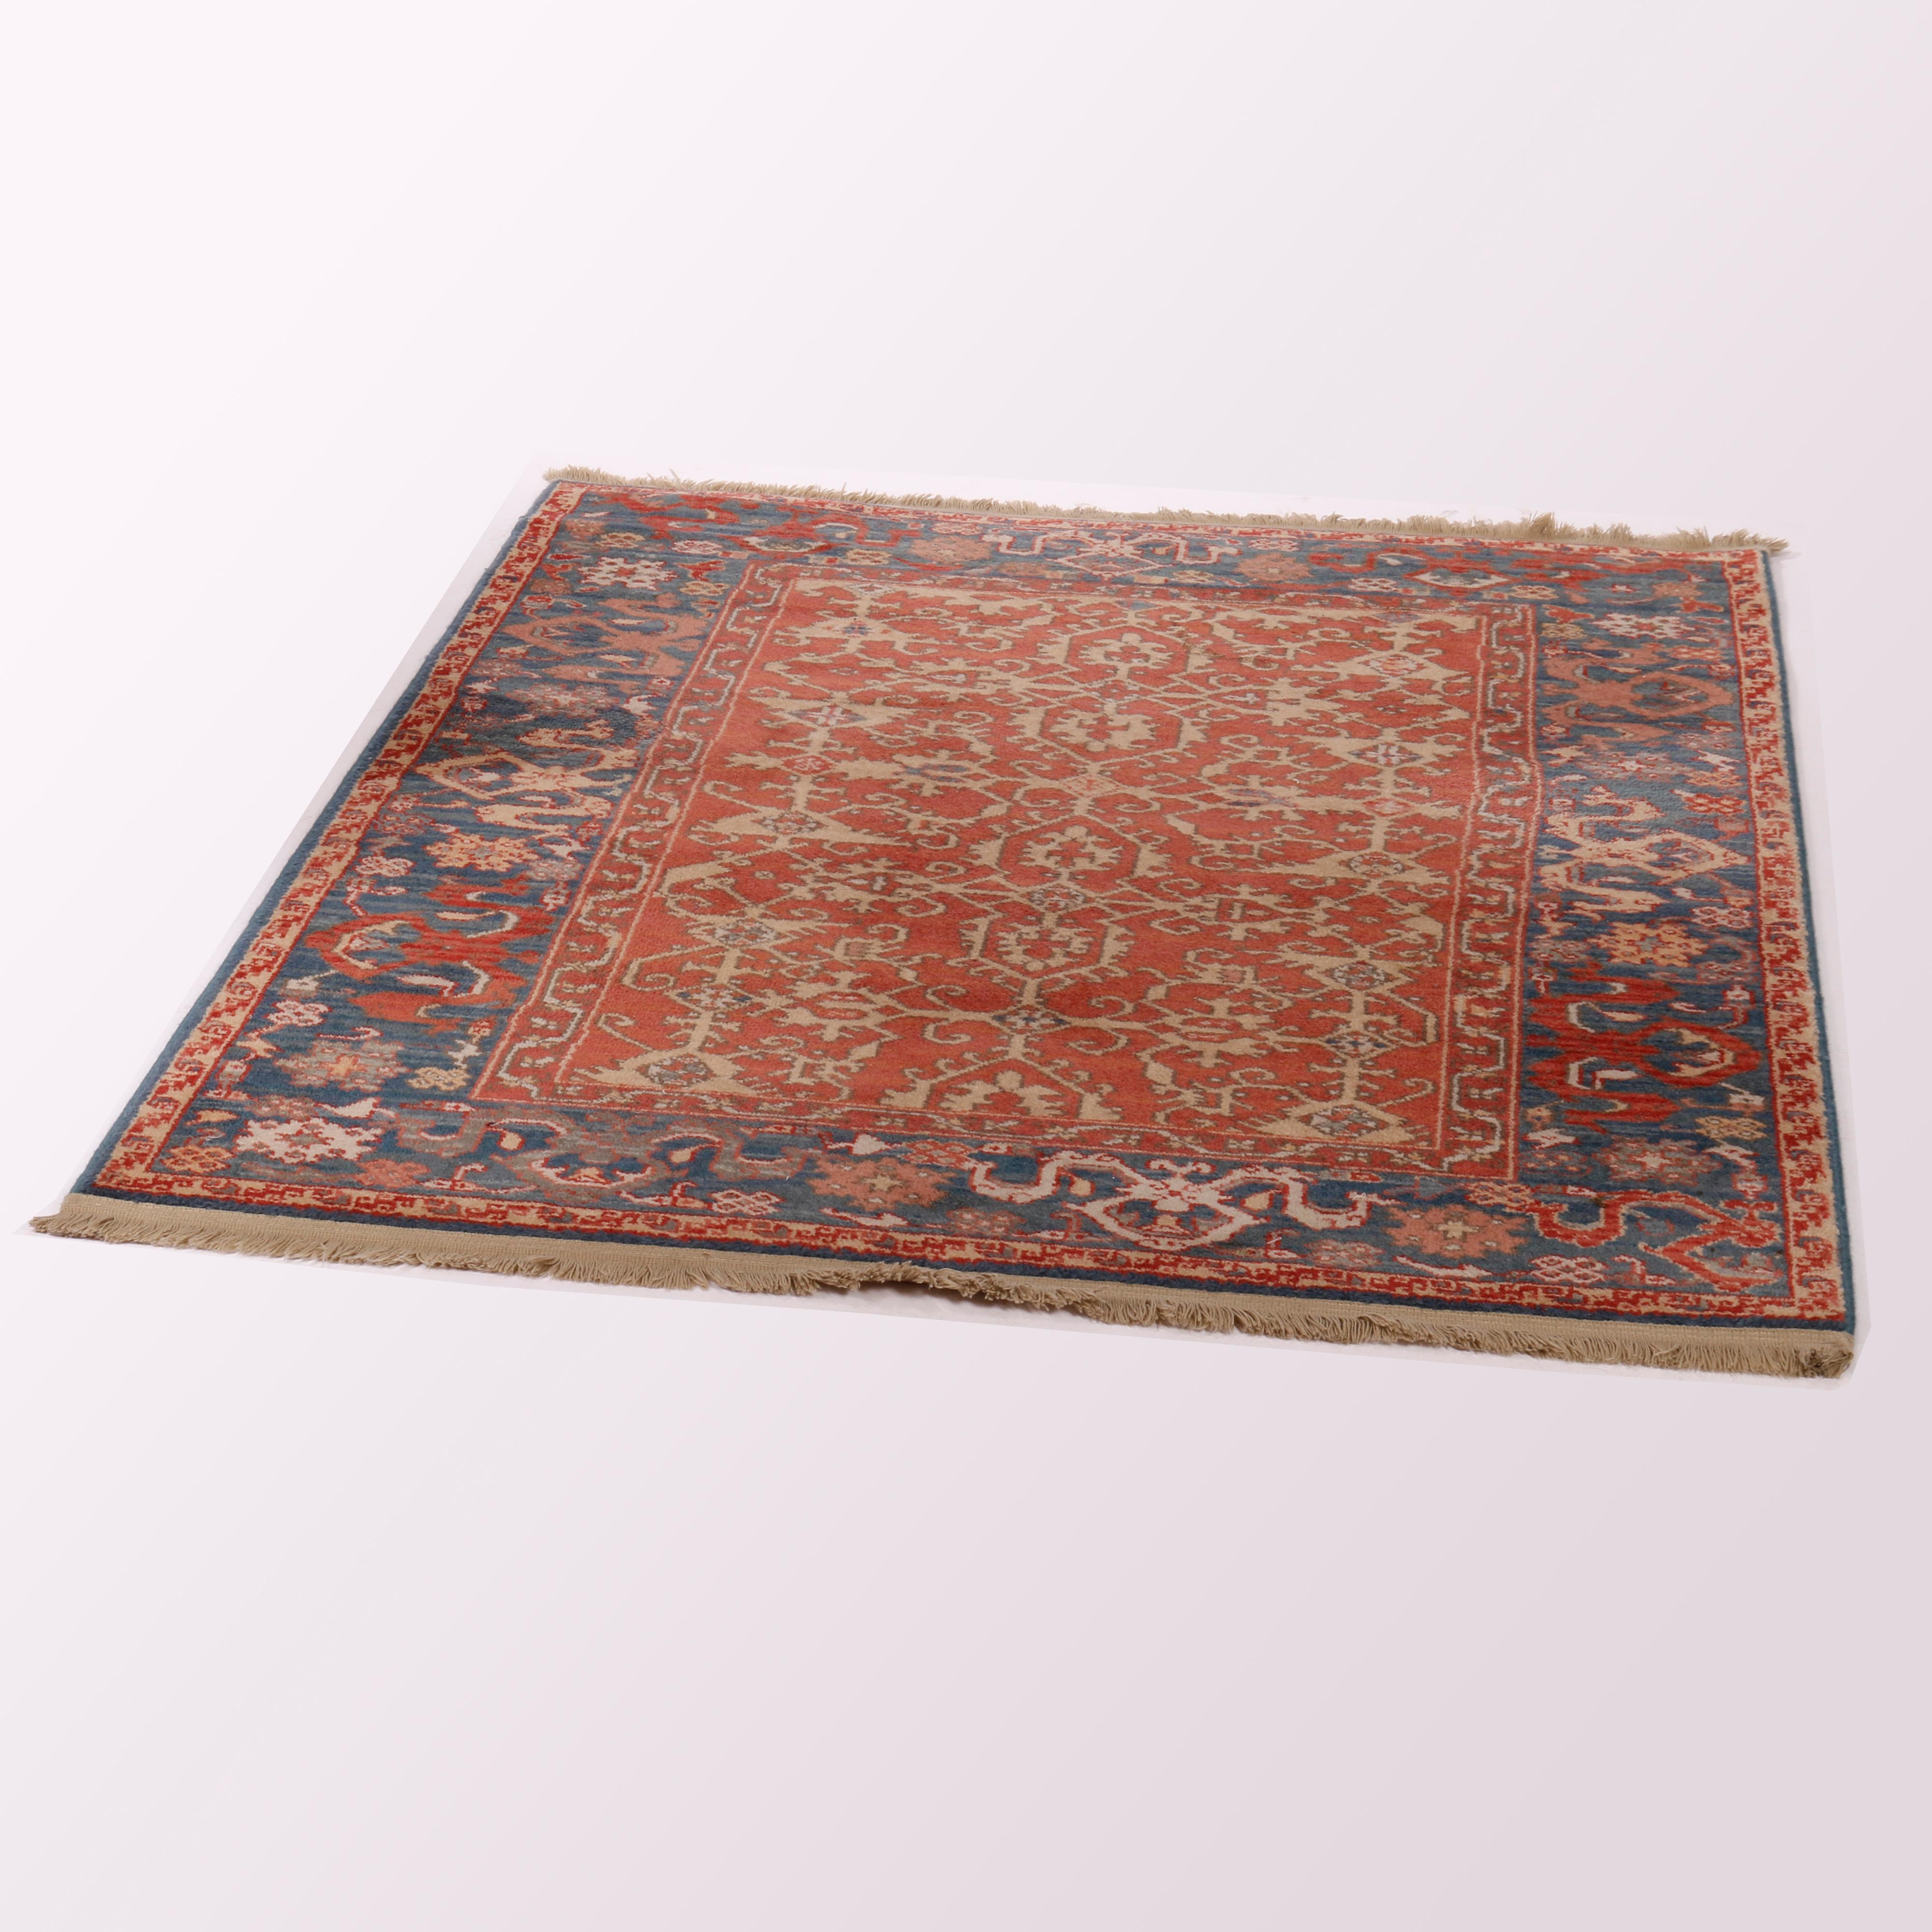 A Colonial Williamsburg Karastan Ushak oriental rug in Pattern 552 offers wool construction with stylized floral and foliate allover design, maker label as photographed, 4.3' X 5.9', 20th century

Measures - 71''L x 52.25''W x .5''D.
 